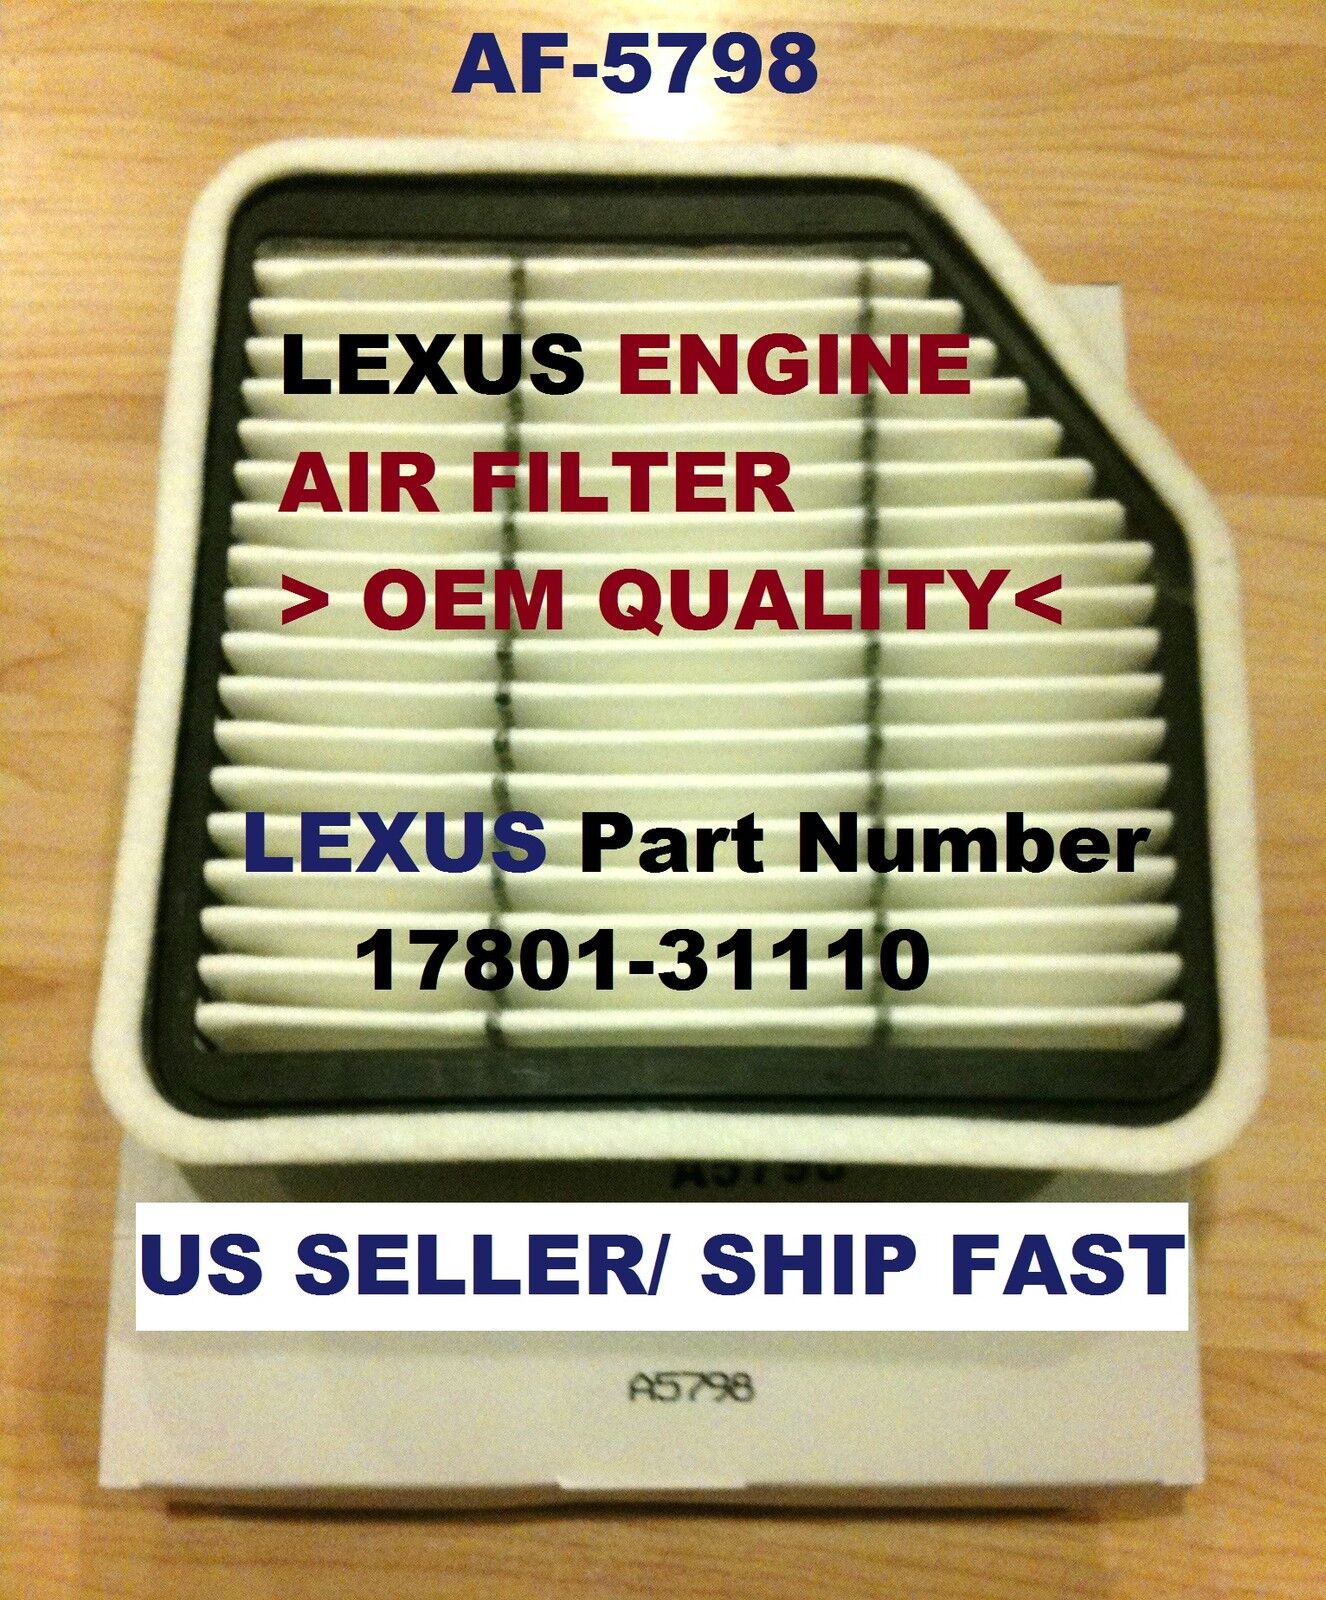 AF5798 OEM Quality Engine Air Filter for NEW LEXUS GS350 GS430 IS250 IS350 @_@